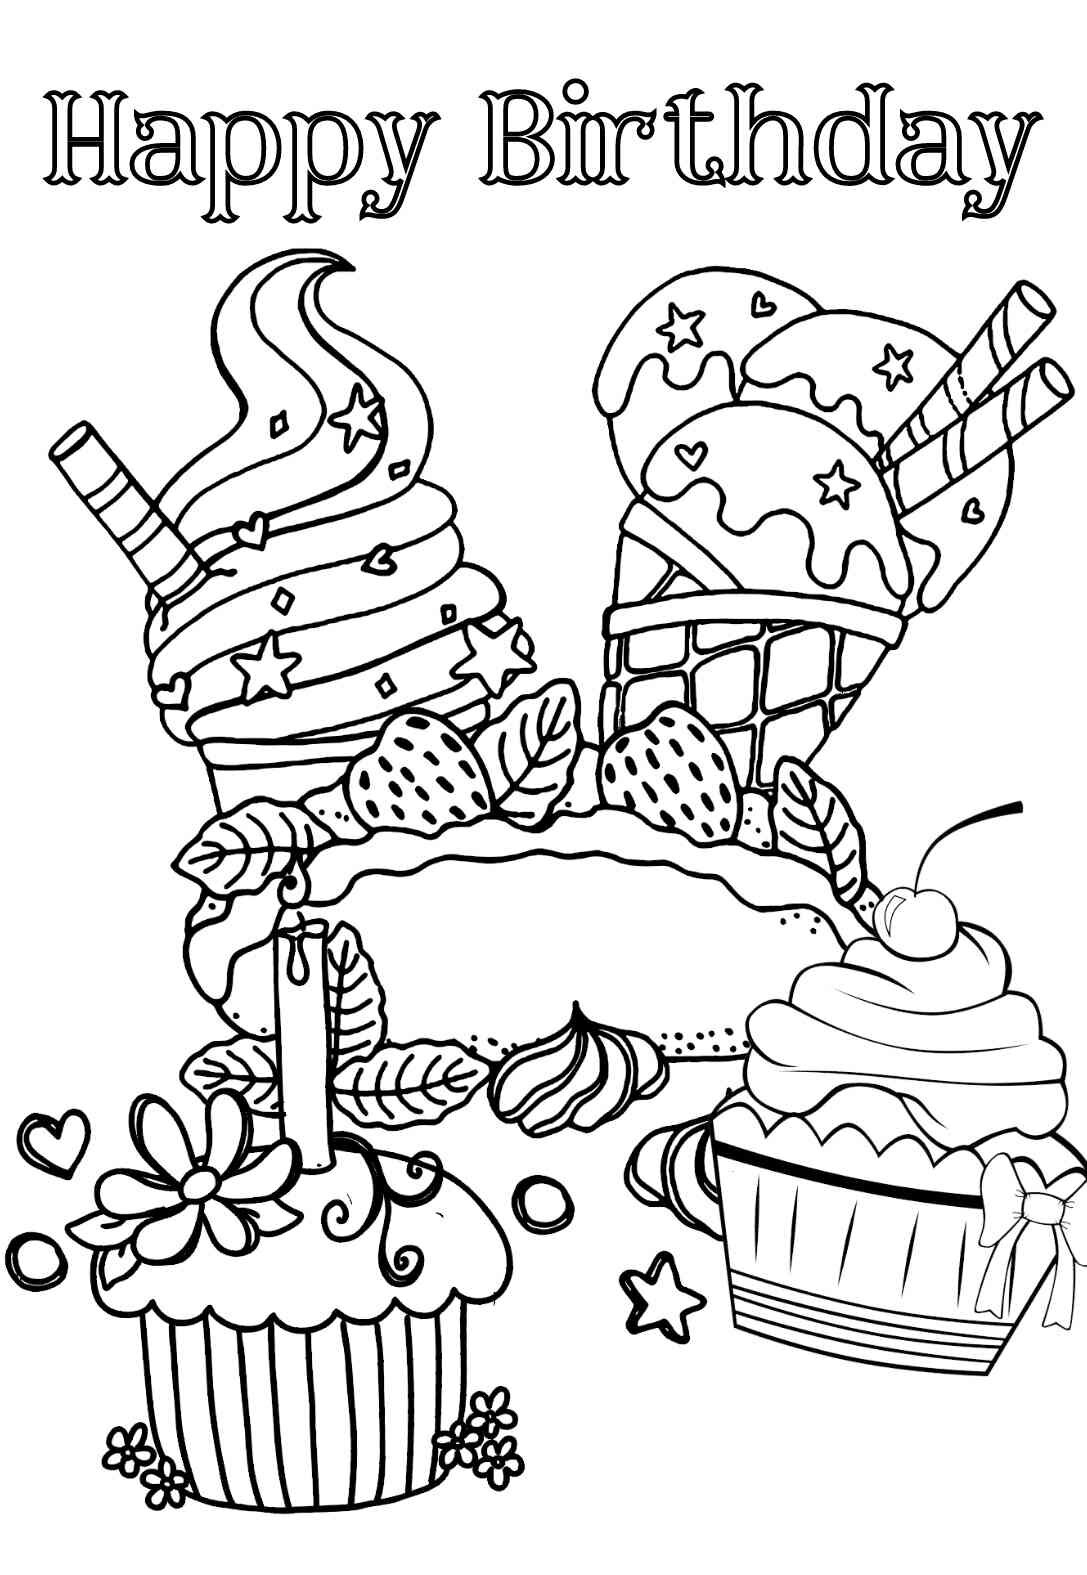 9 Sweet Cupcake Birthday Coloring Pages & Cards (free) — PRINTBIRTHDAY ...